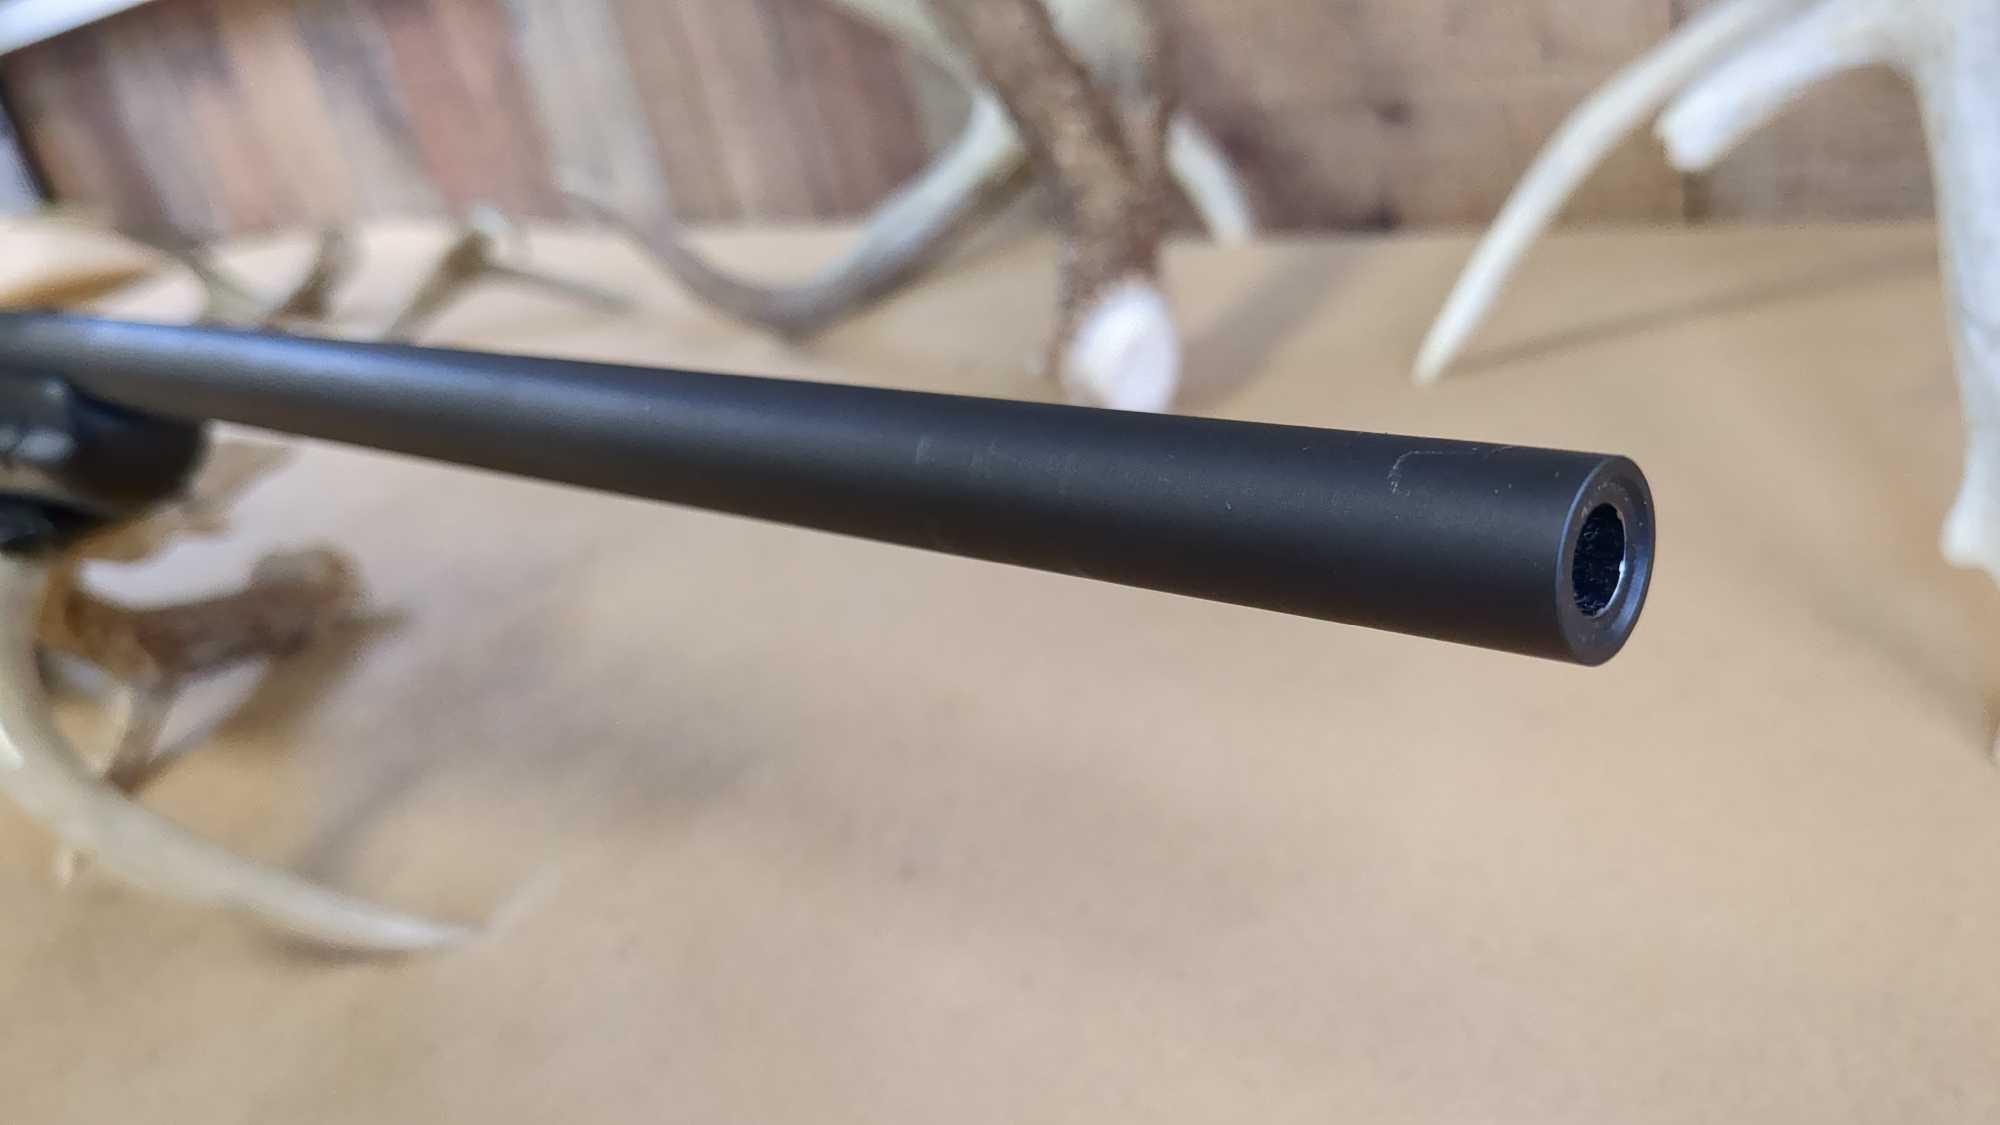 RUGER AMERICAN 30-06 BOLT ACTION RIFLE